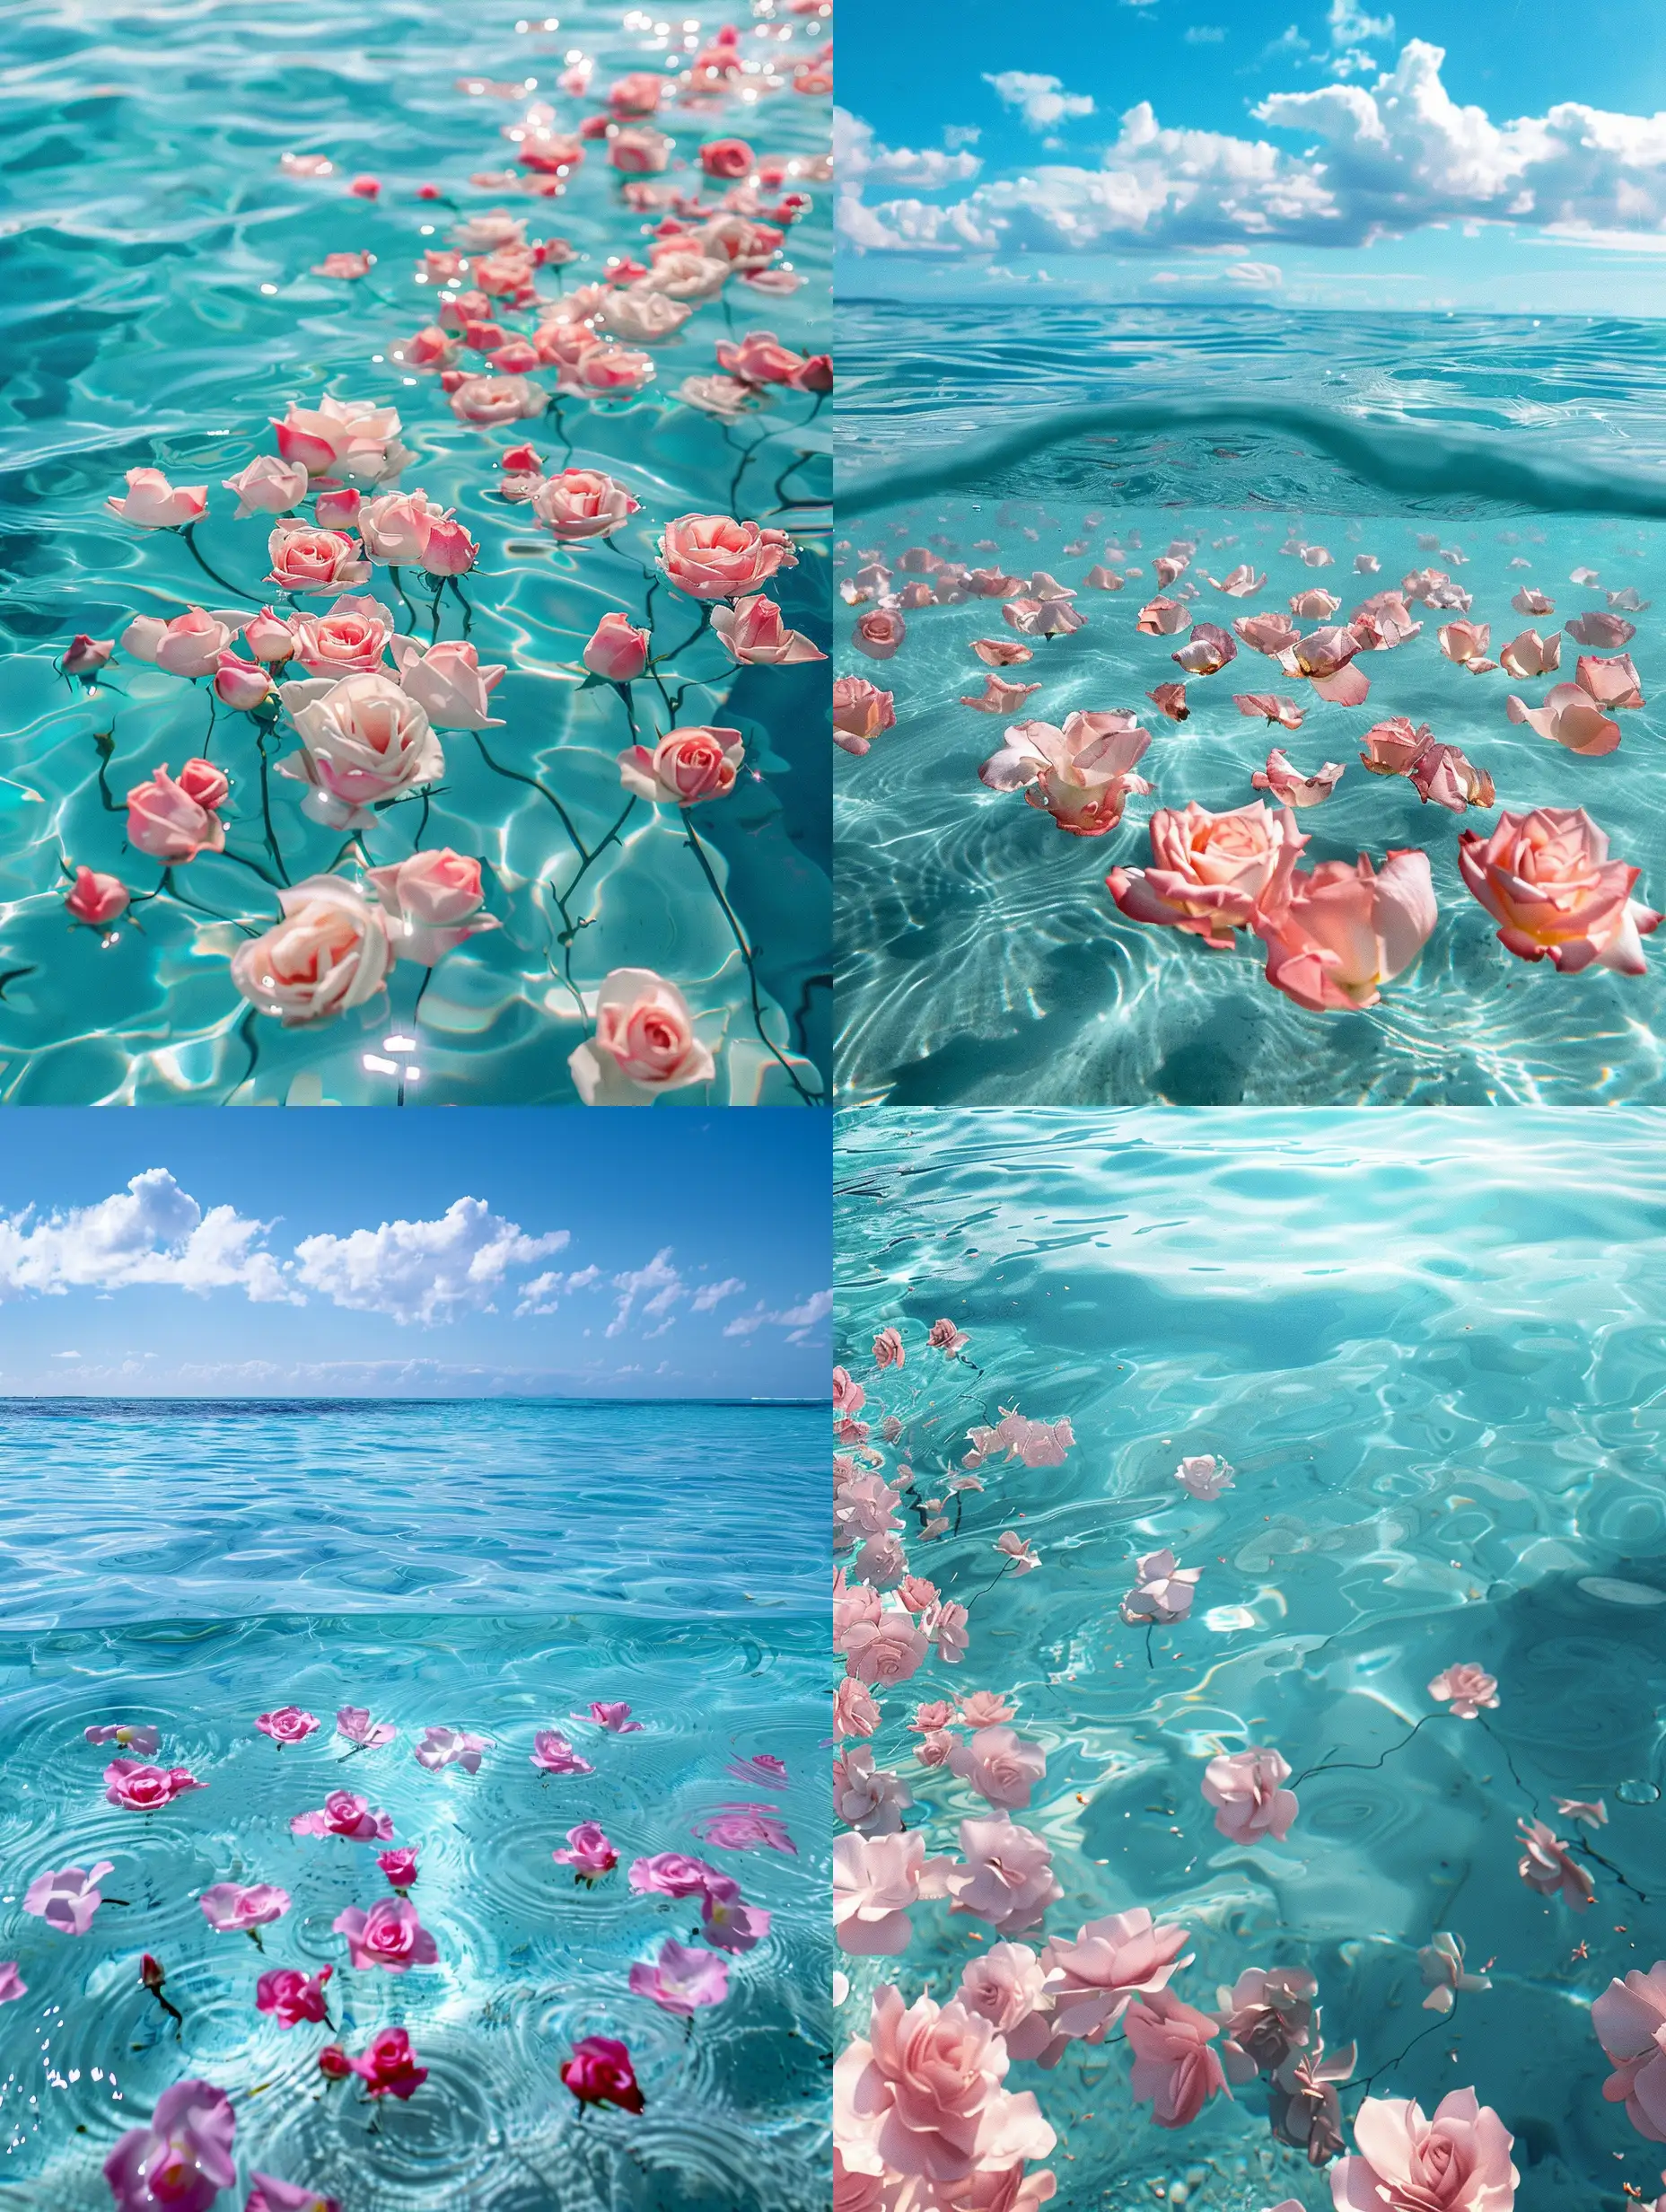 Clear-Blue-Sea-with-Rose-Petals-Beautiful-and-Dreamy-High-Definition-Seascape